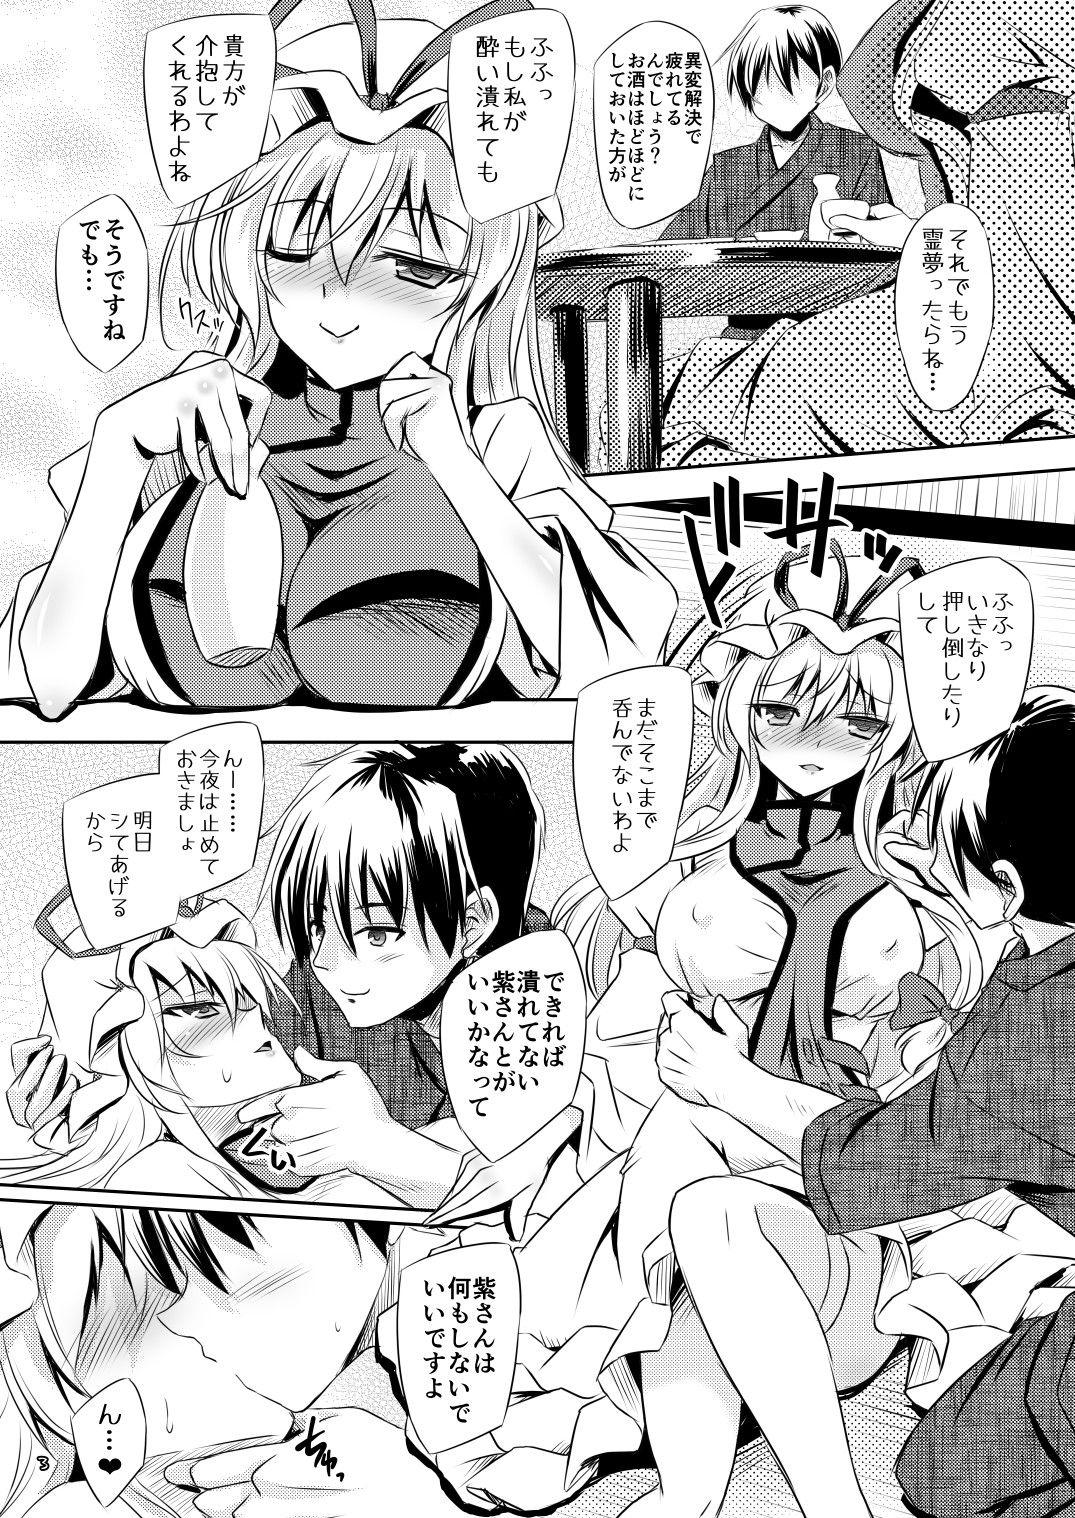 Interracial Kenja no Tame no Prelude - Touhou project Tattooed - Page 3